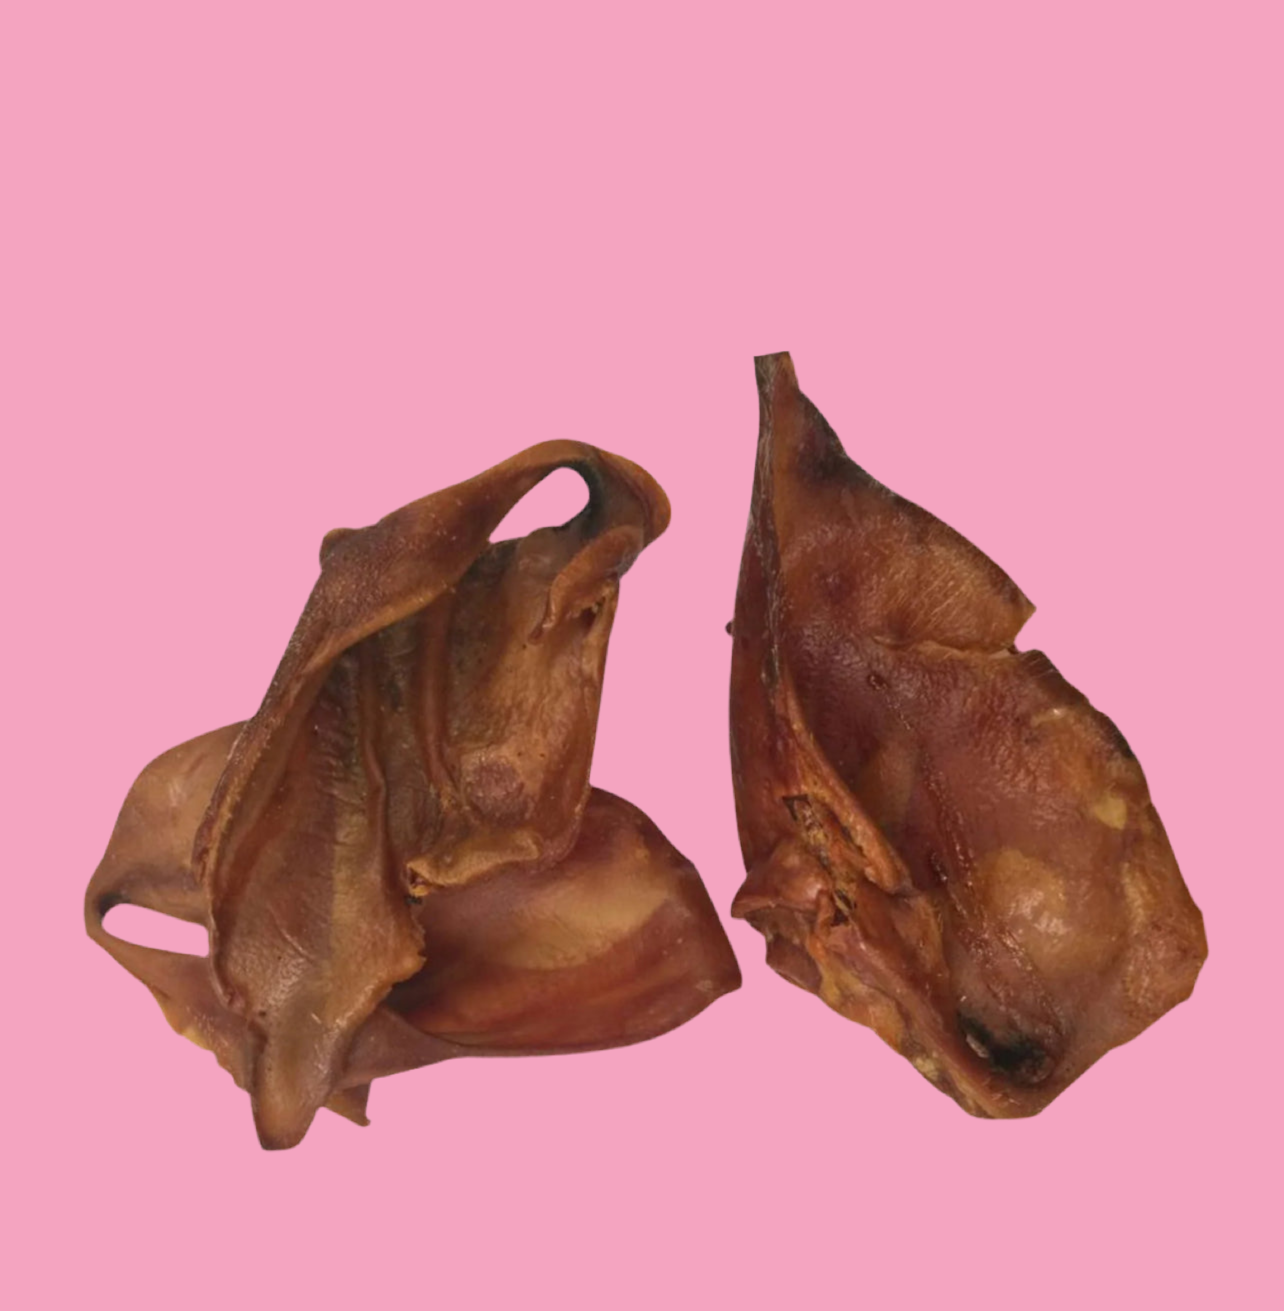 Sow Ears "Extra Large Pig Ears”